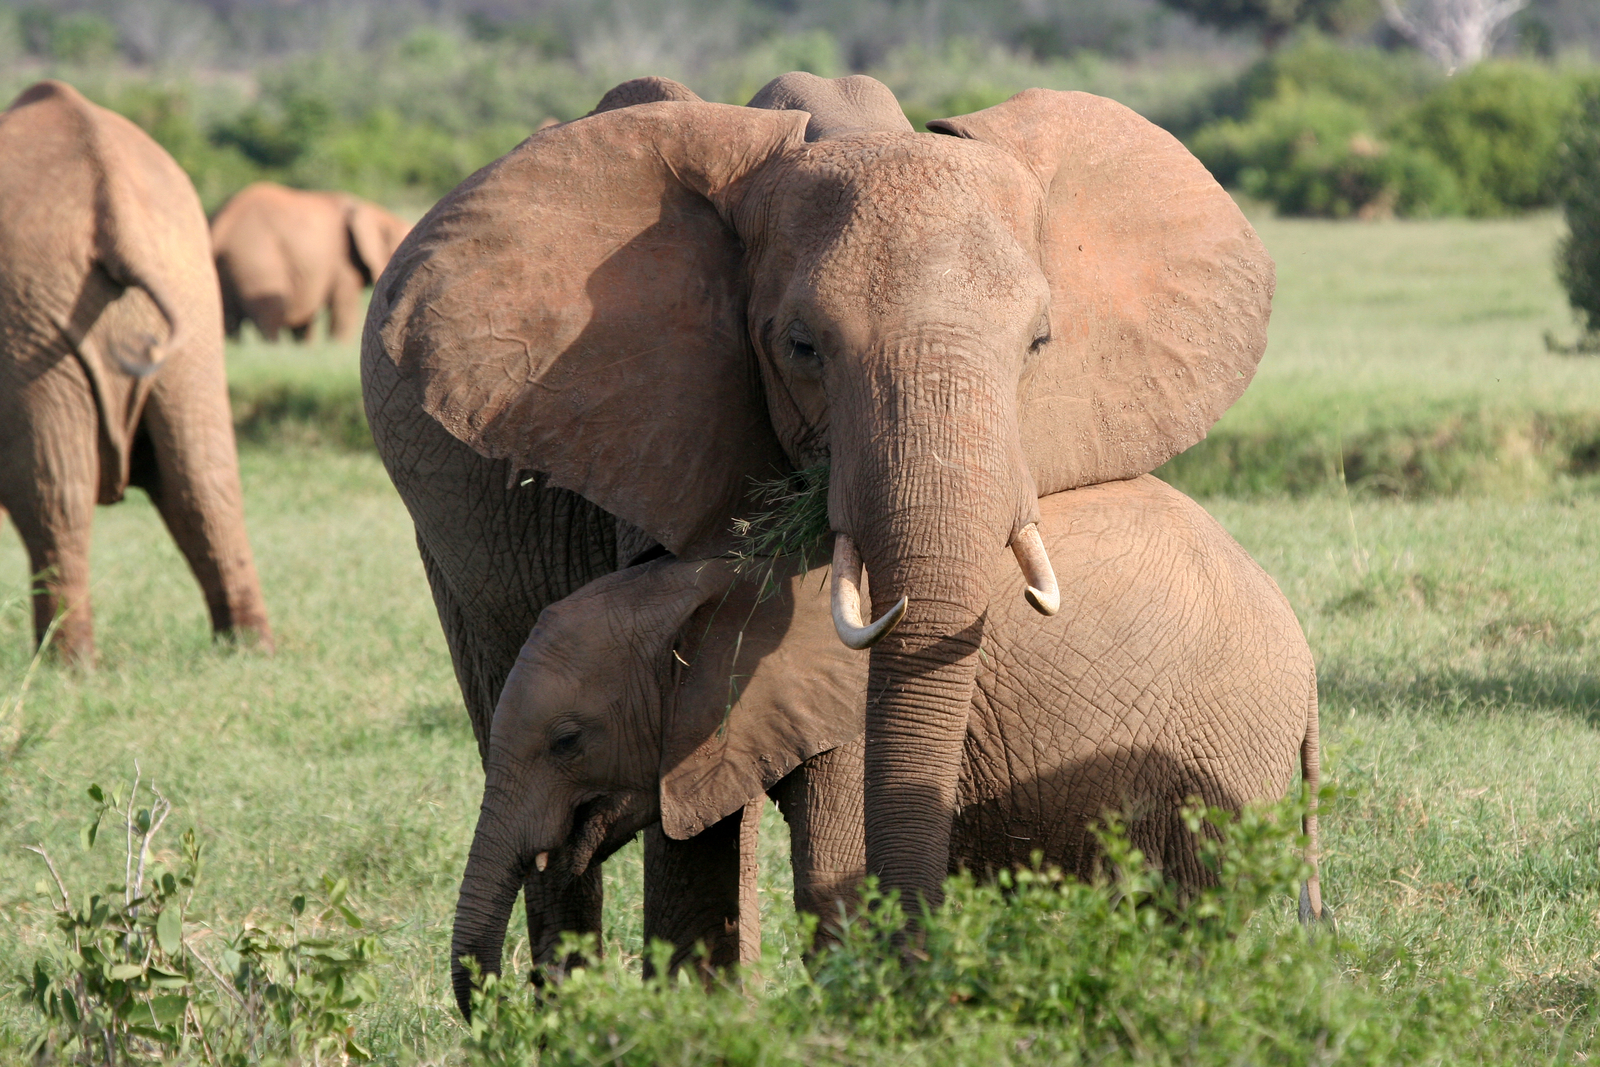 African savanna elephant (Loxodonta africana) mother with calf. Image Credit: © Steffen Foerster | Dreamstime.com.